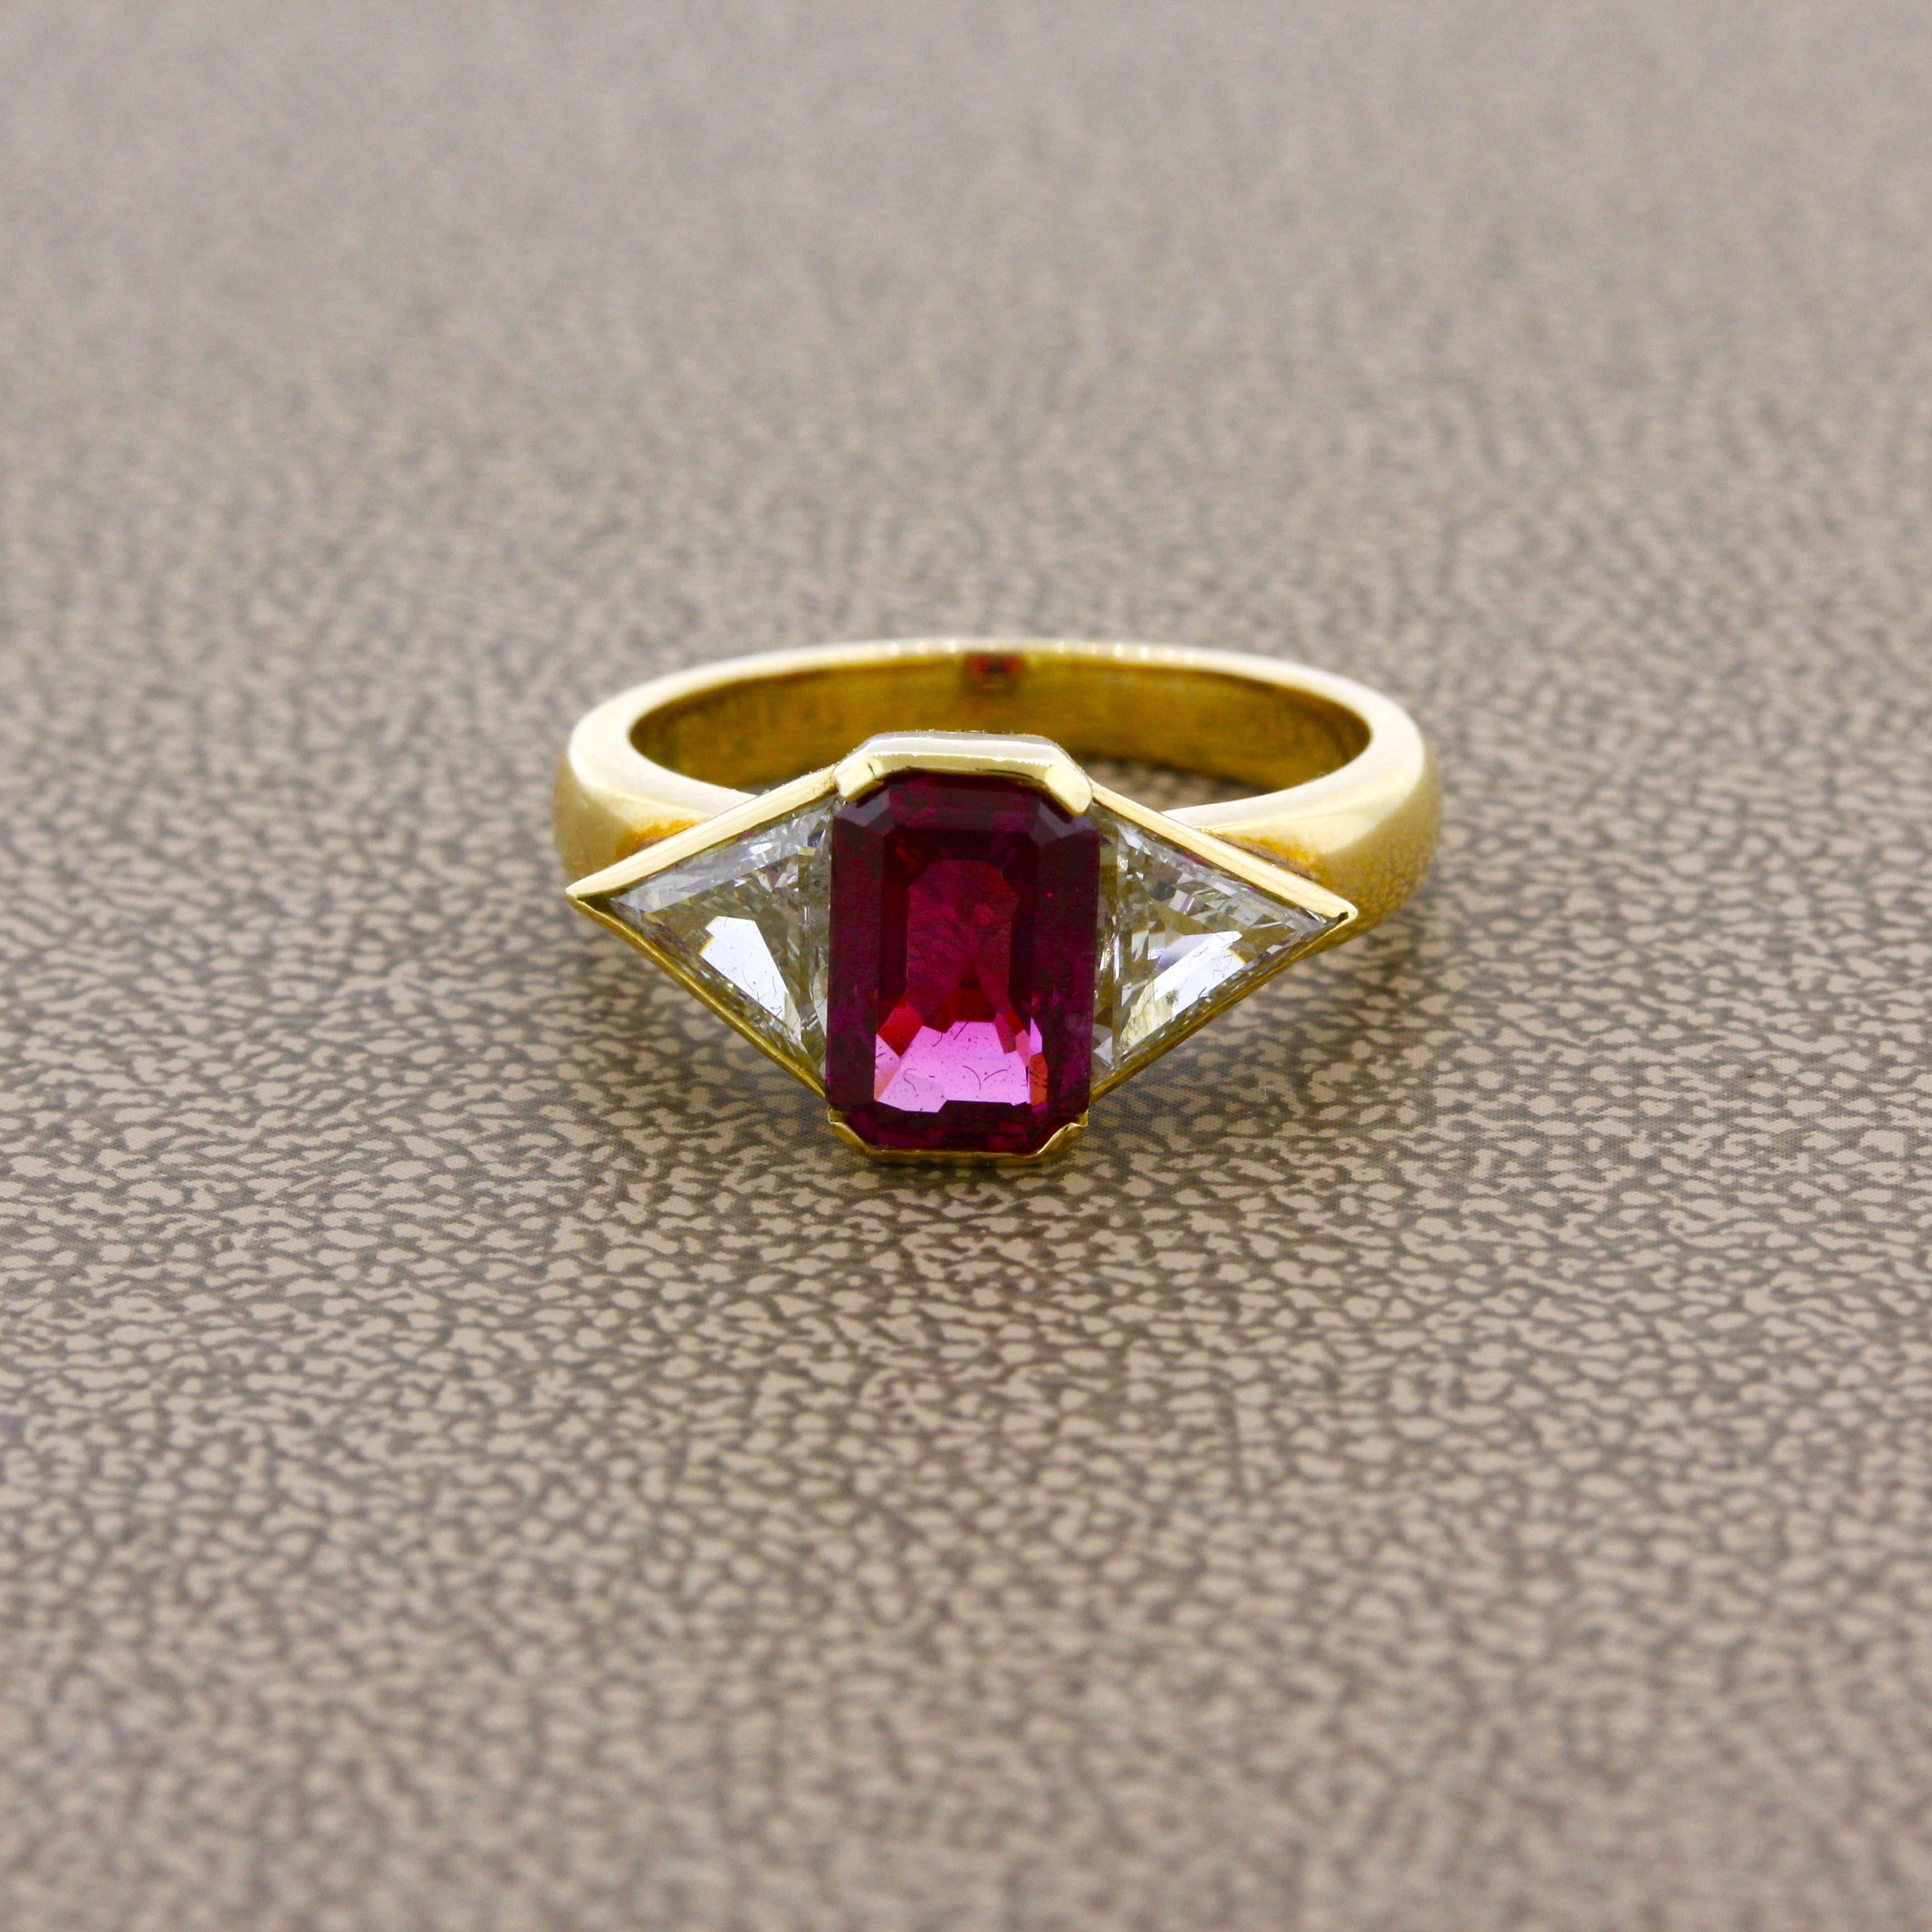 A lovely sleek and simple modern designed featuring fine gemstones and diamonds.  The ruby is a very fine stone weighing 2.31 carats and comes from a more unique origin in Vietnam. It has a rich deep and purplish-pinkish-red color which is just so